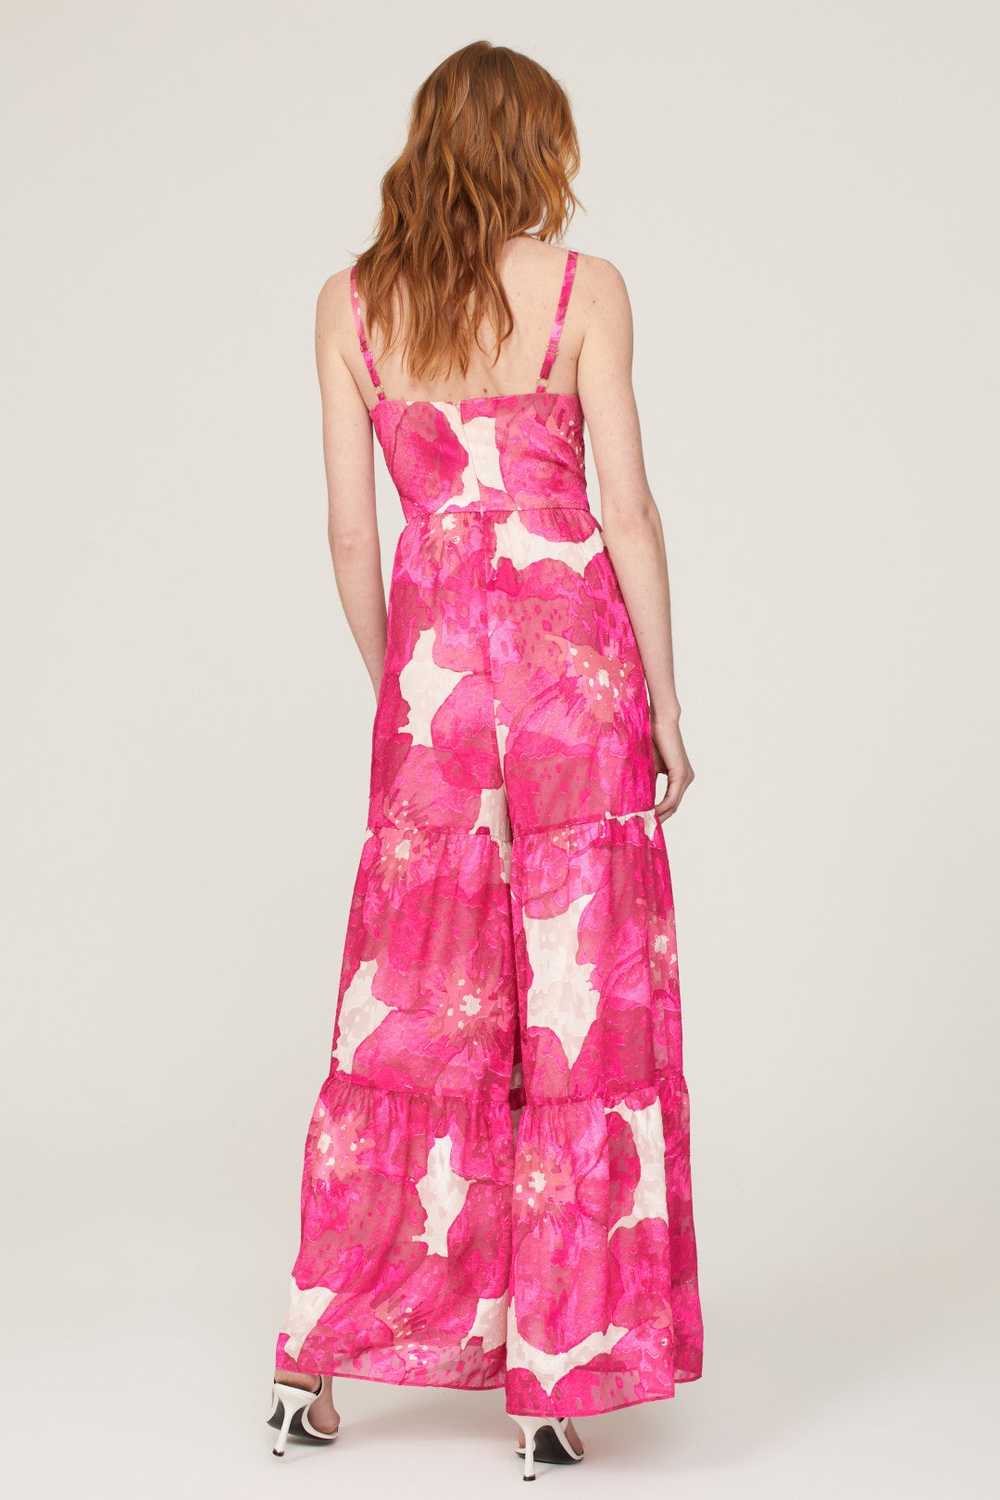 Slate & Willow Pink Floral Jumpsuit - image 3